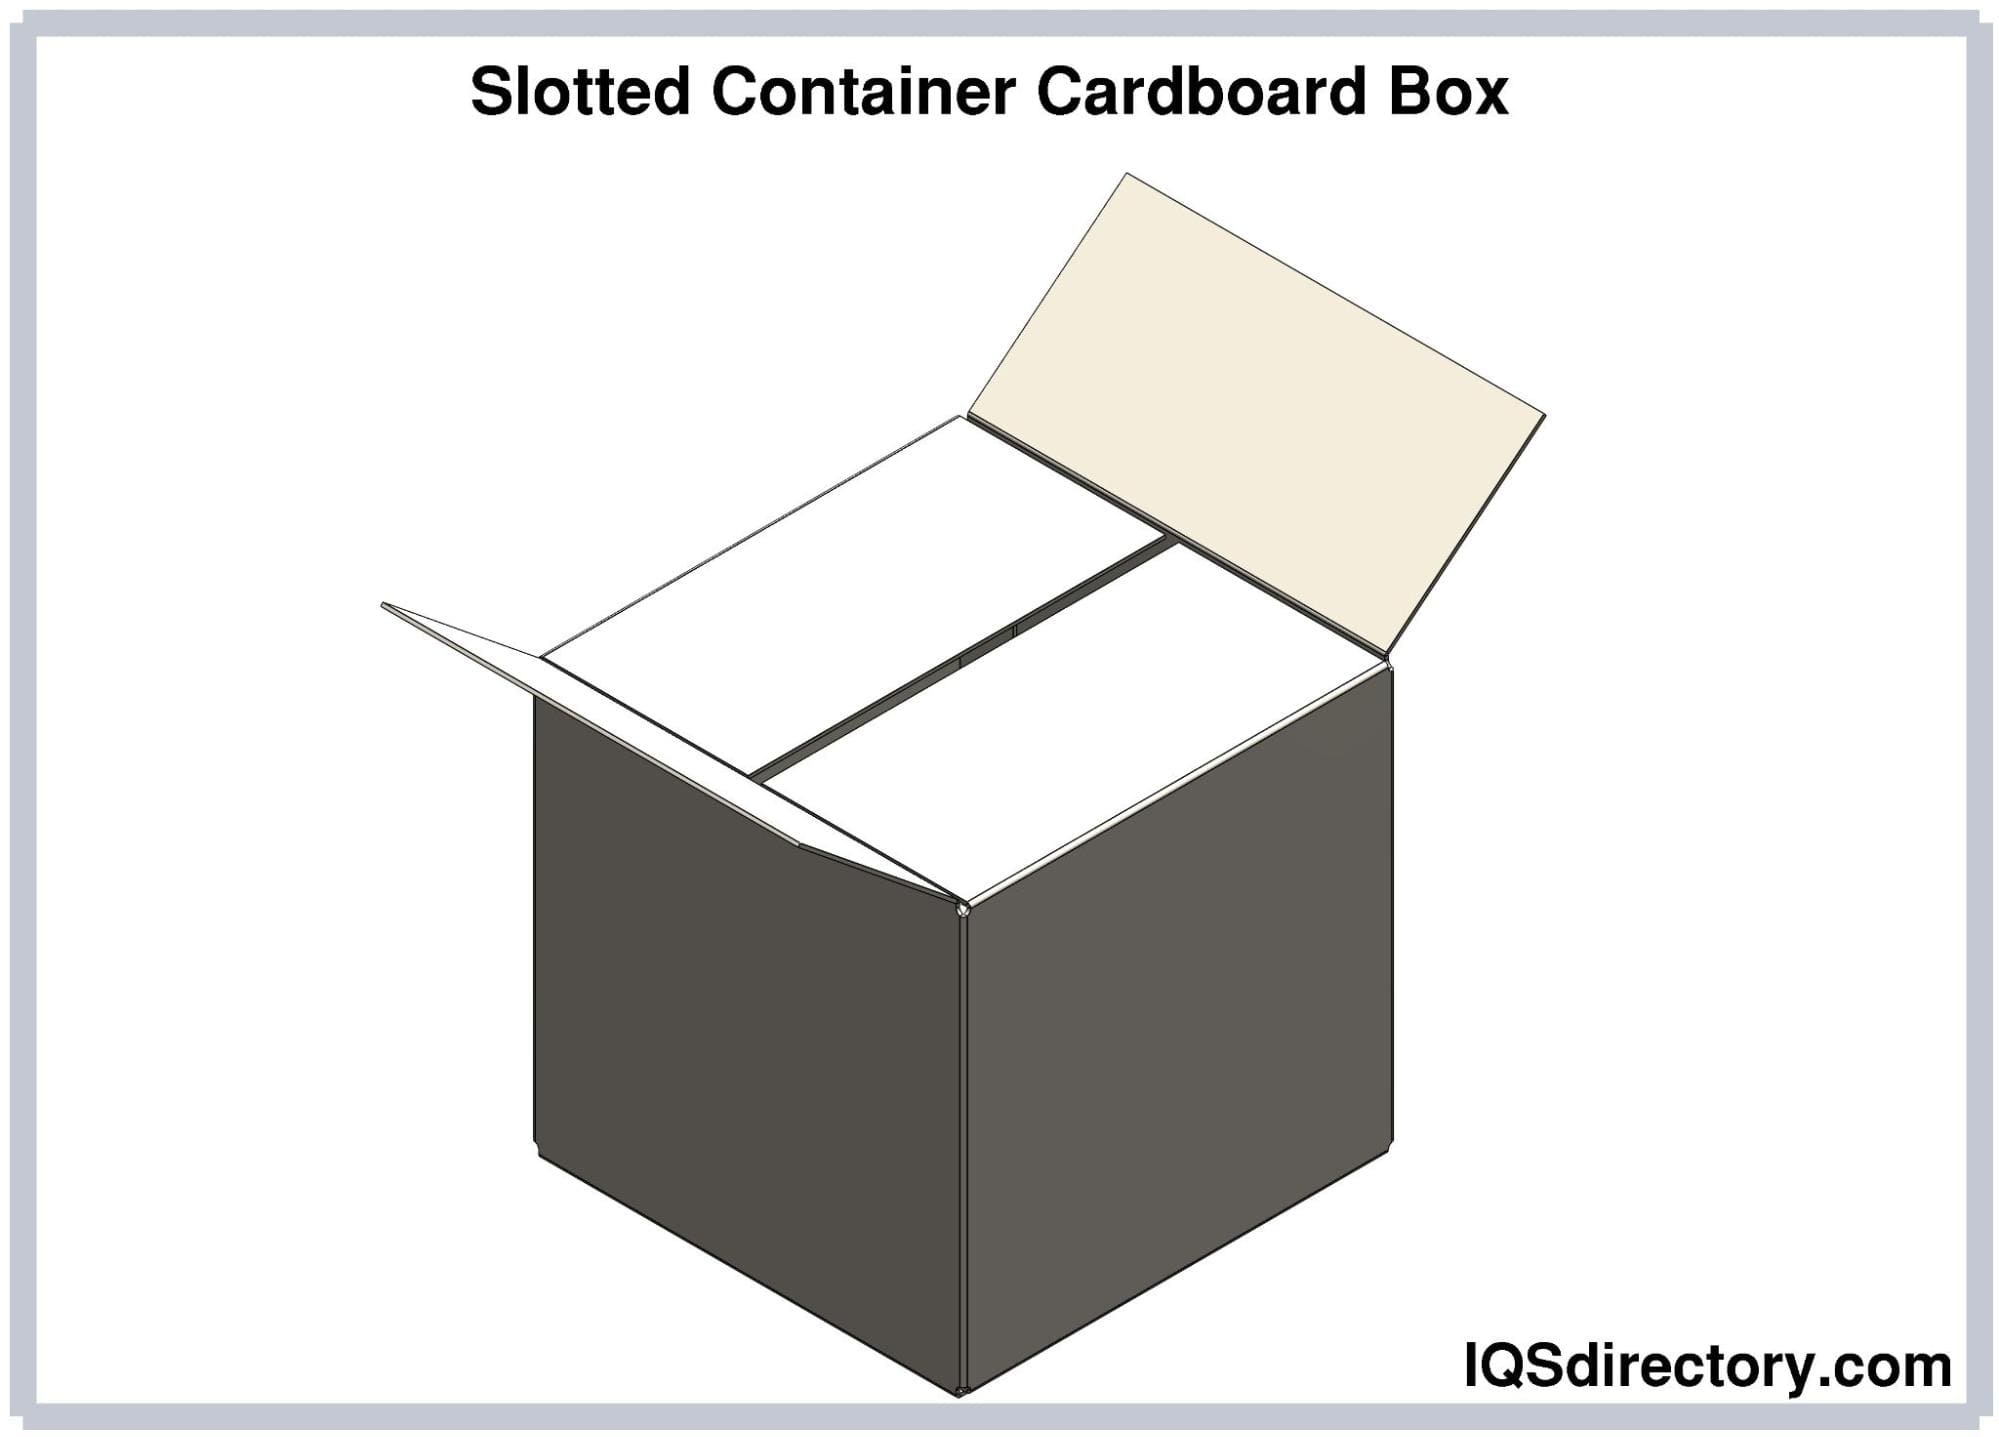 Slotted Container Cardboard Box